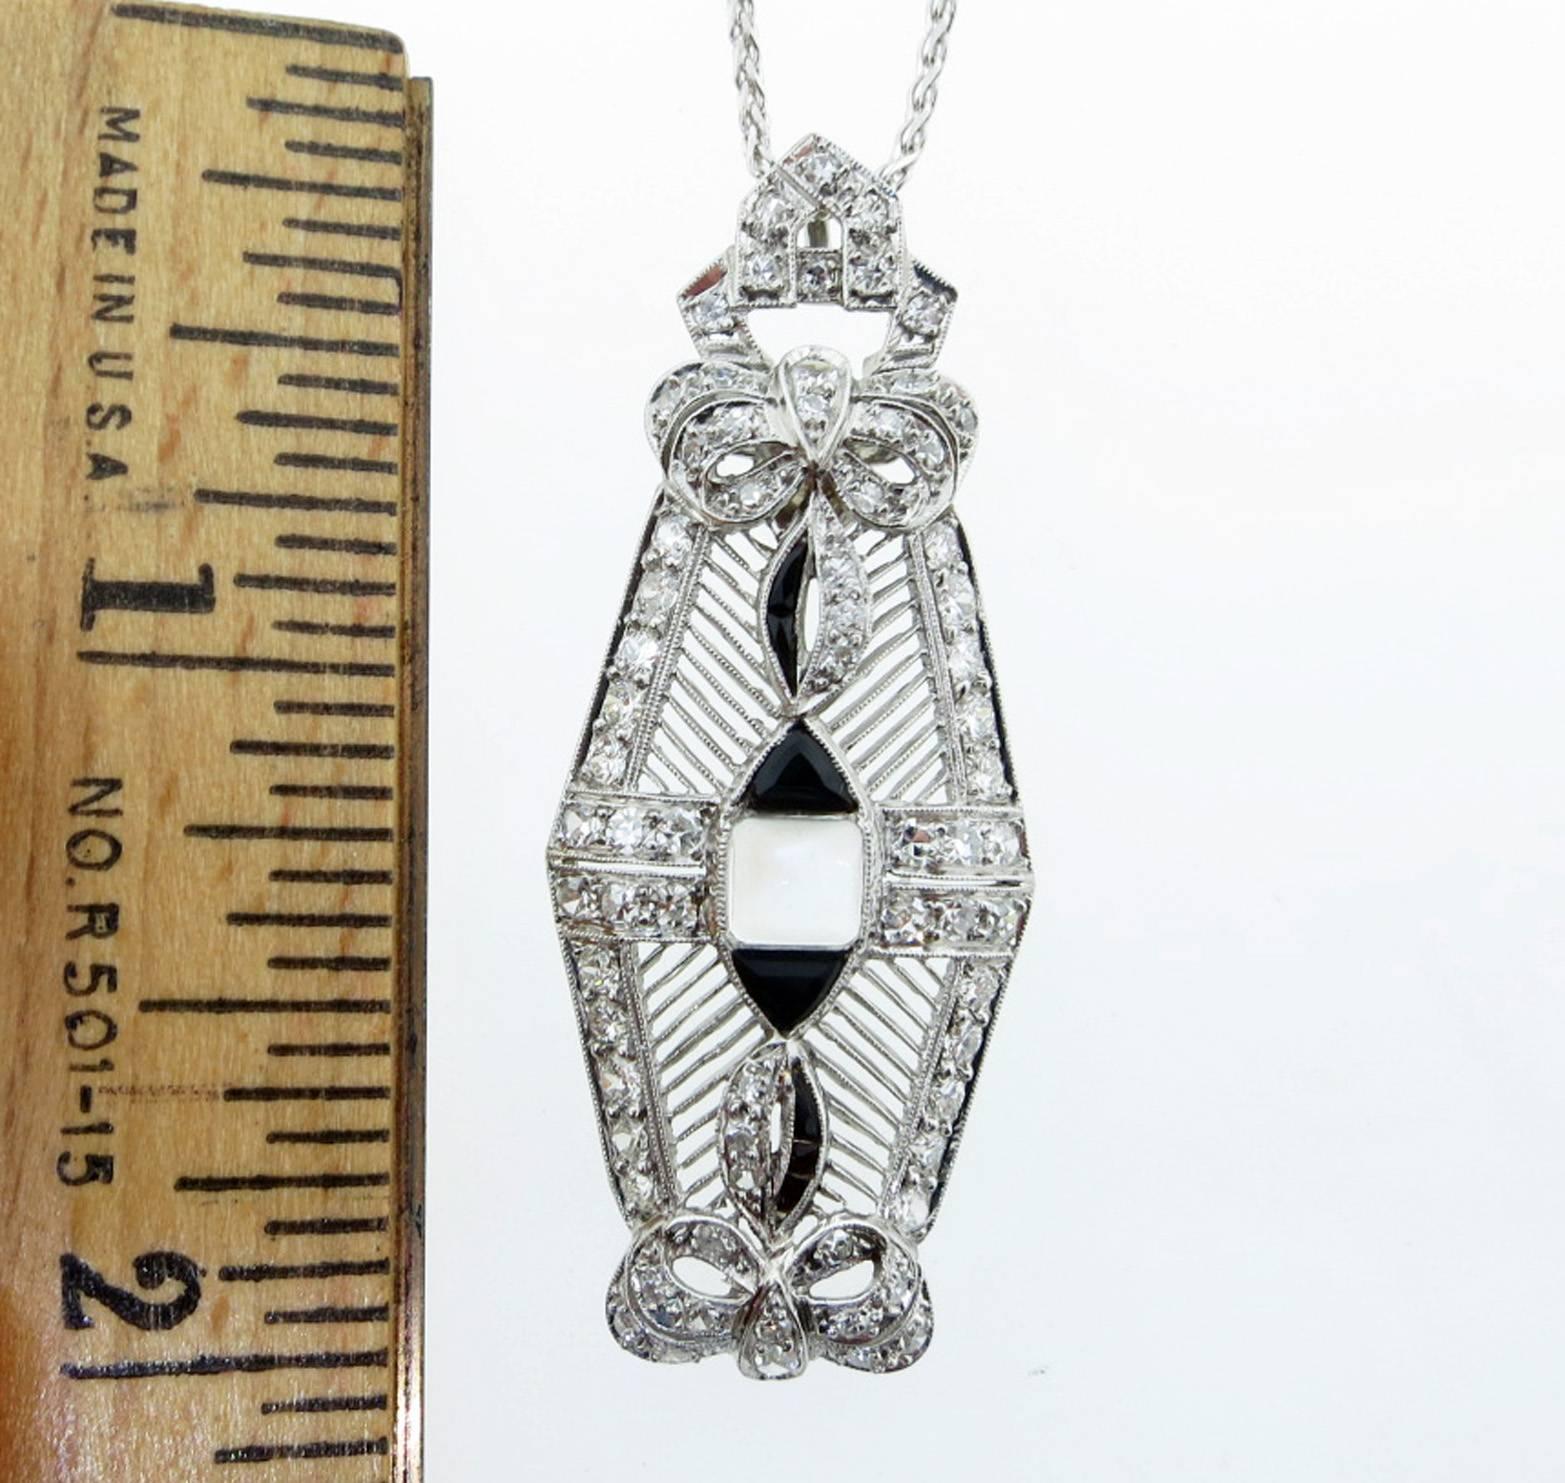 Platinum open work bow motif pendant set with a center pyramid shape moonstone, black onyx accents and 70 round European cut diamonds totaling approx. 1.5cts. The pendant measures approx 2 inches in length  with an articulated pendant top. Circa